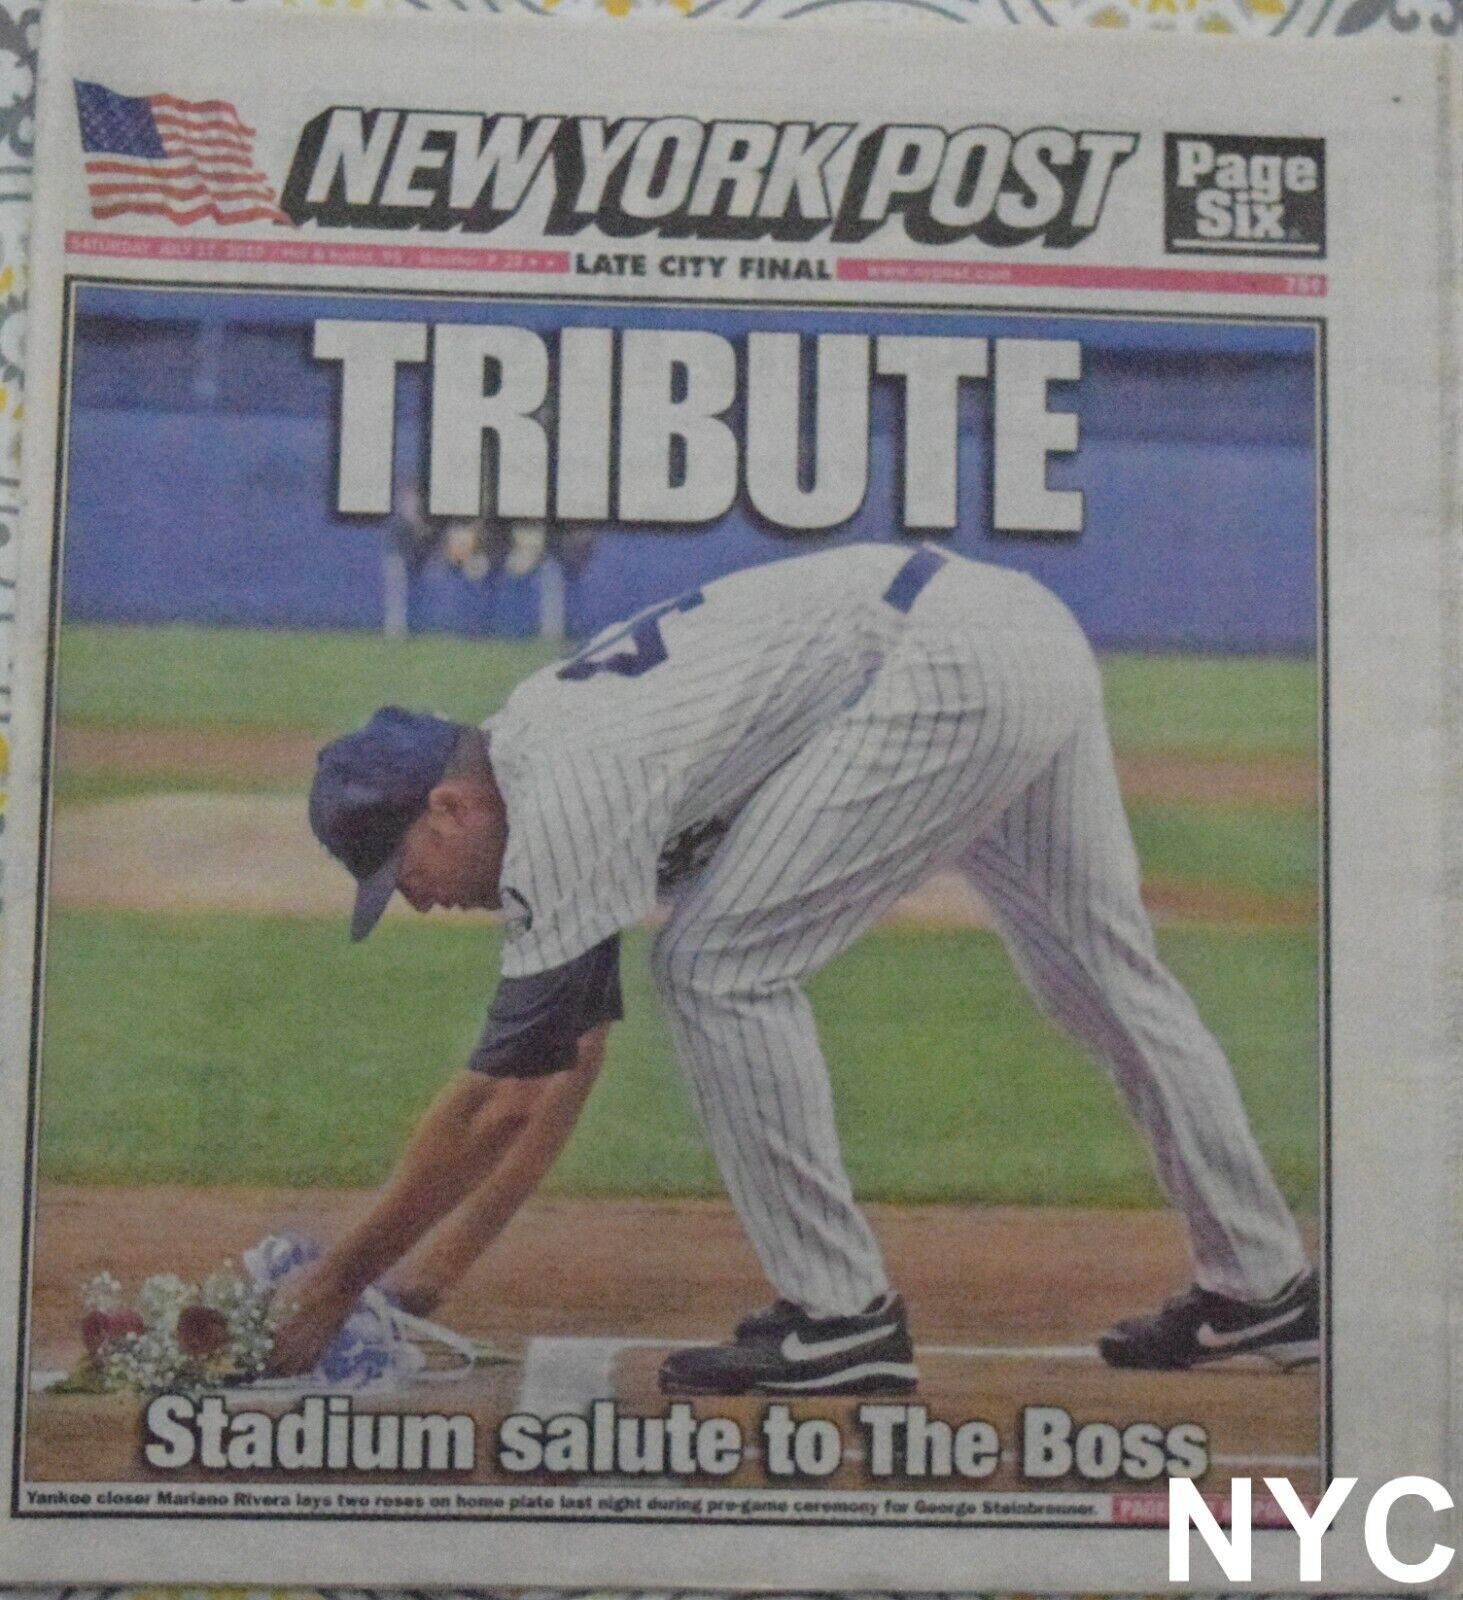 Mariano Rivera Tribute To George Steinbrenner New York Post July 17 2010 🔥